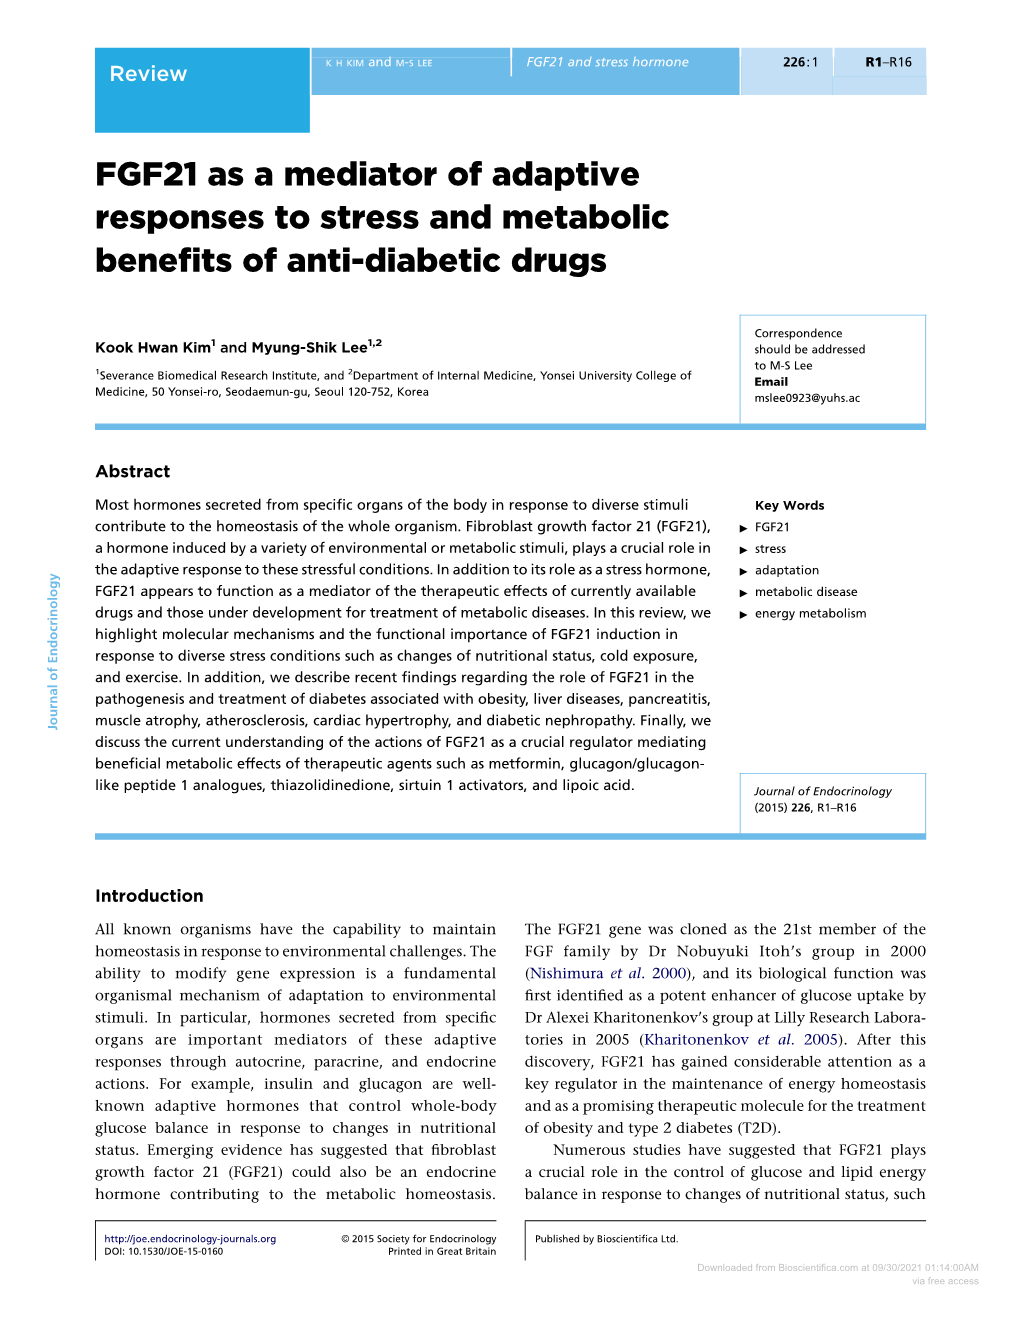 FGF21 As a Mediator of Adaptive Responses to Stress and Metabolic Beneﬁts of Anti-Diabetic Drugs